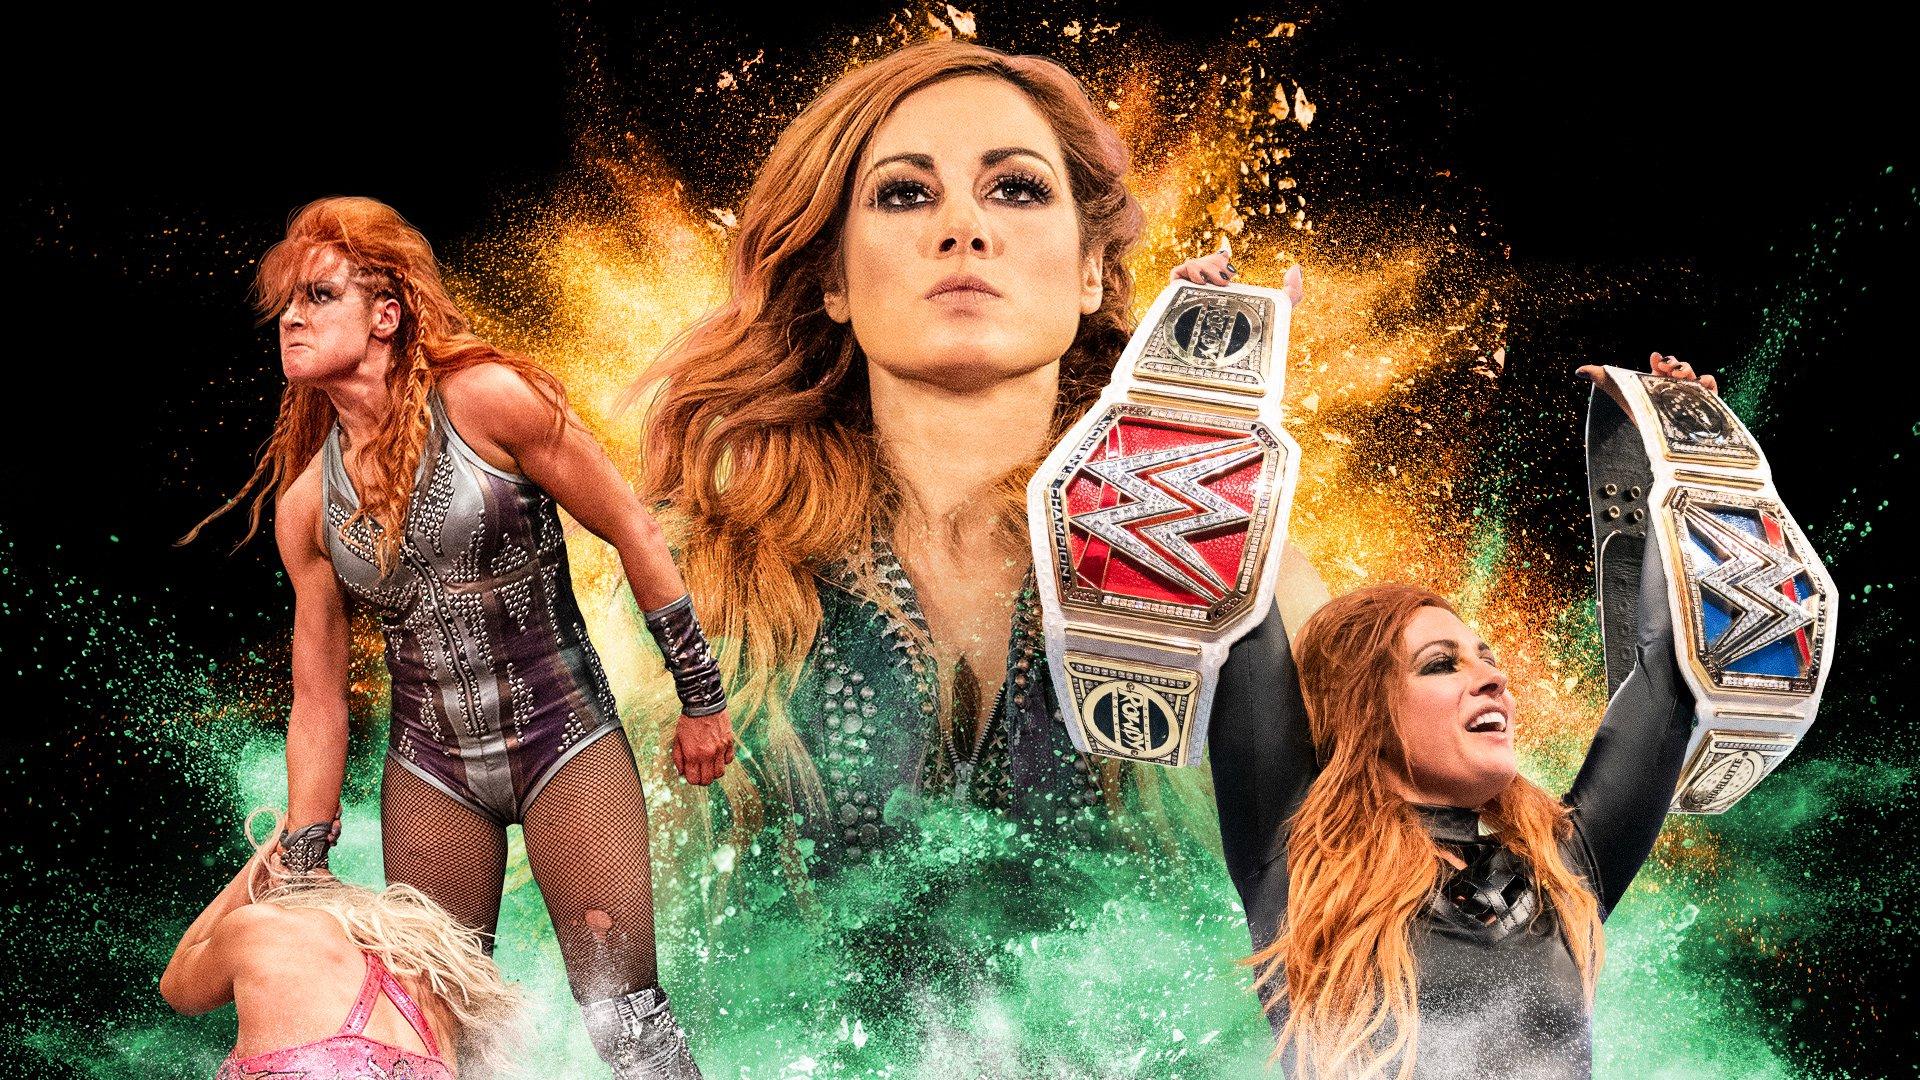 Hd Becky Amazing Becky Wallpaper Full Pictures